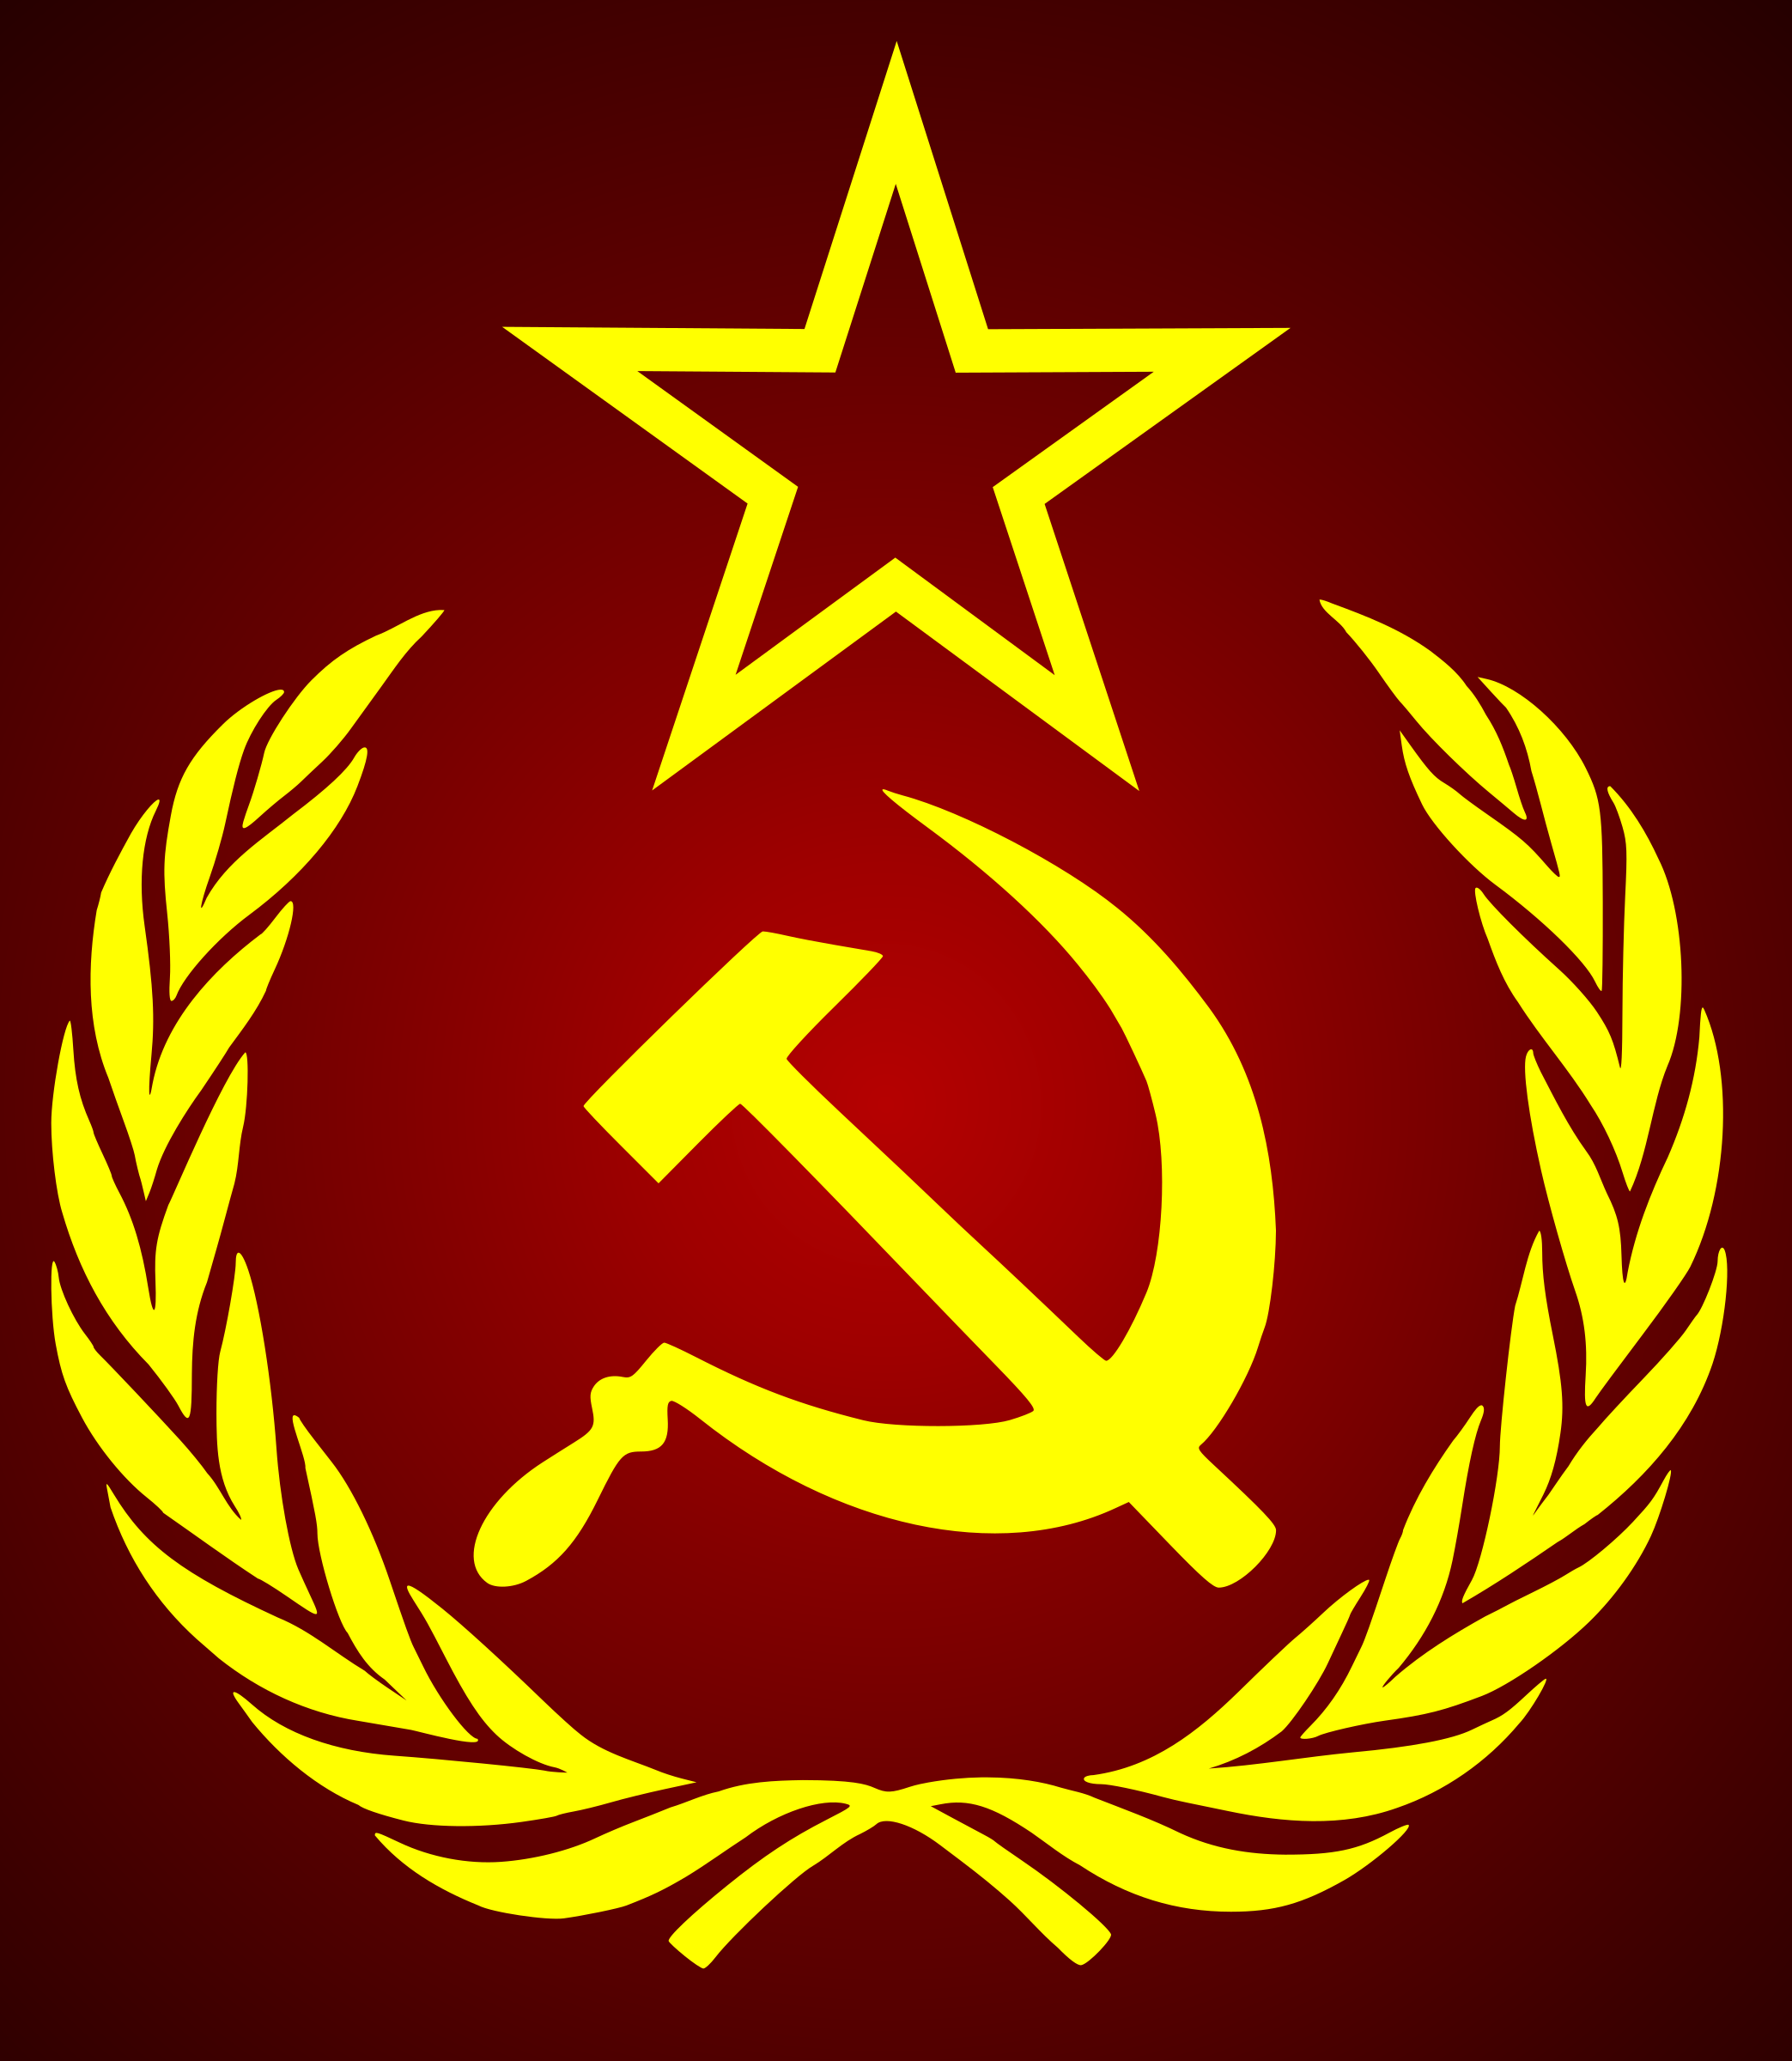 https://openclipart.org/image/2400px/svg_to_png/150655/hammer-sickle-star-color.png